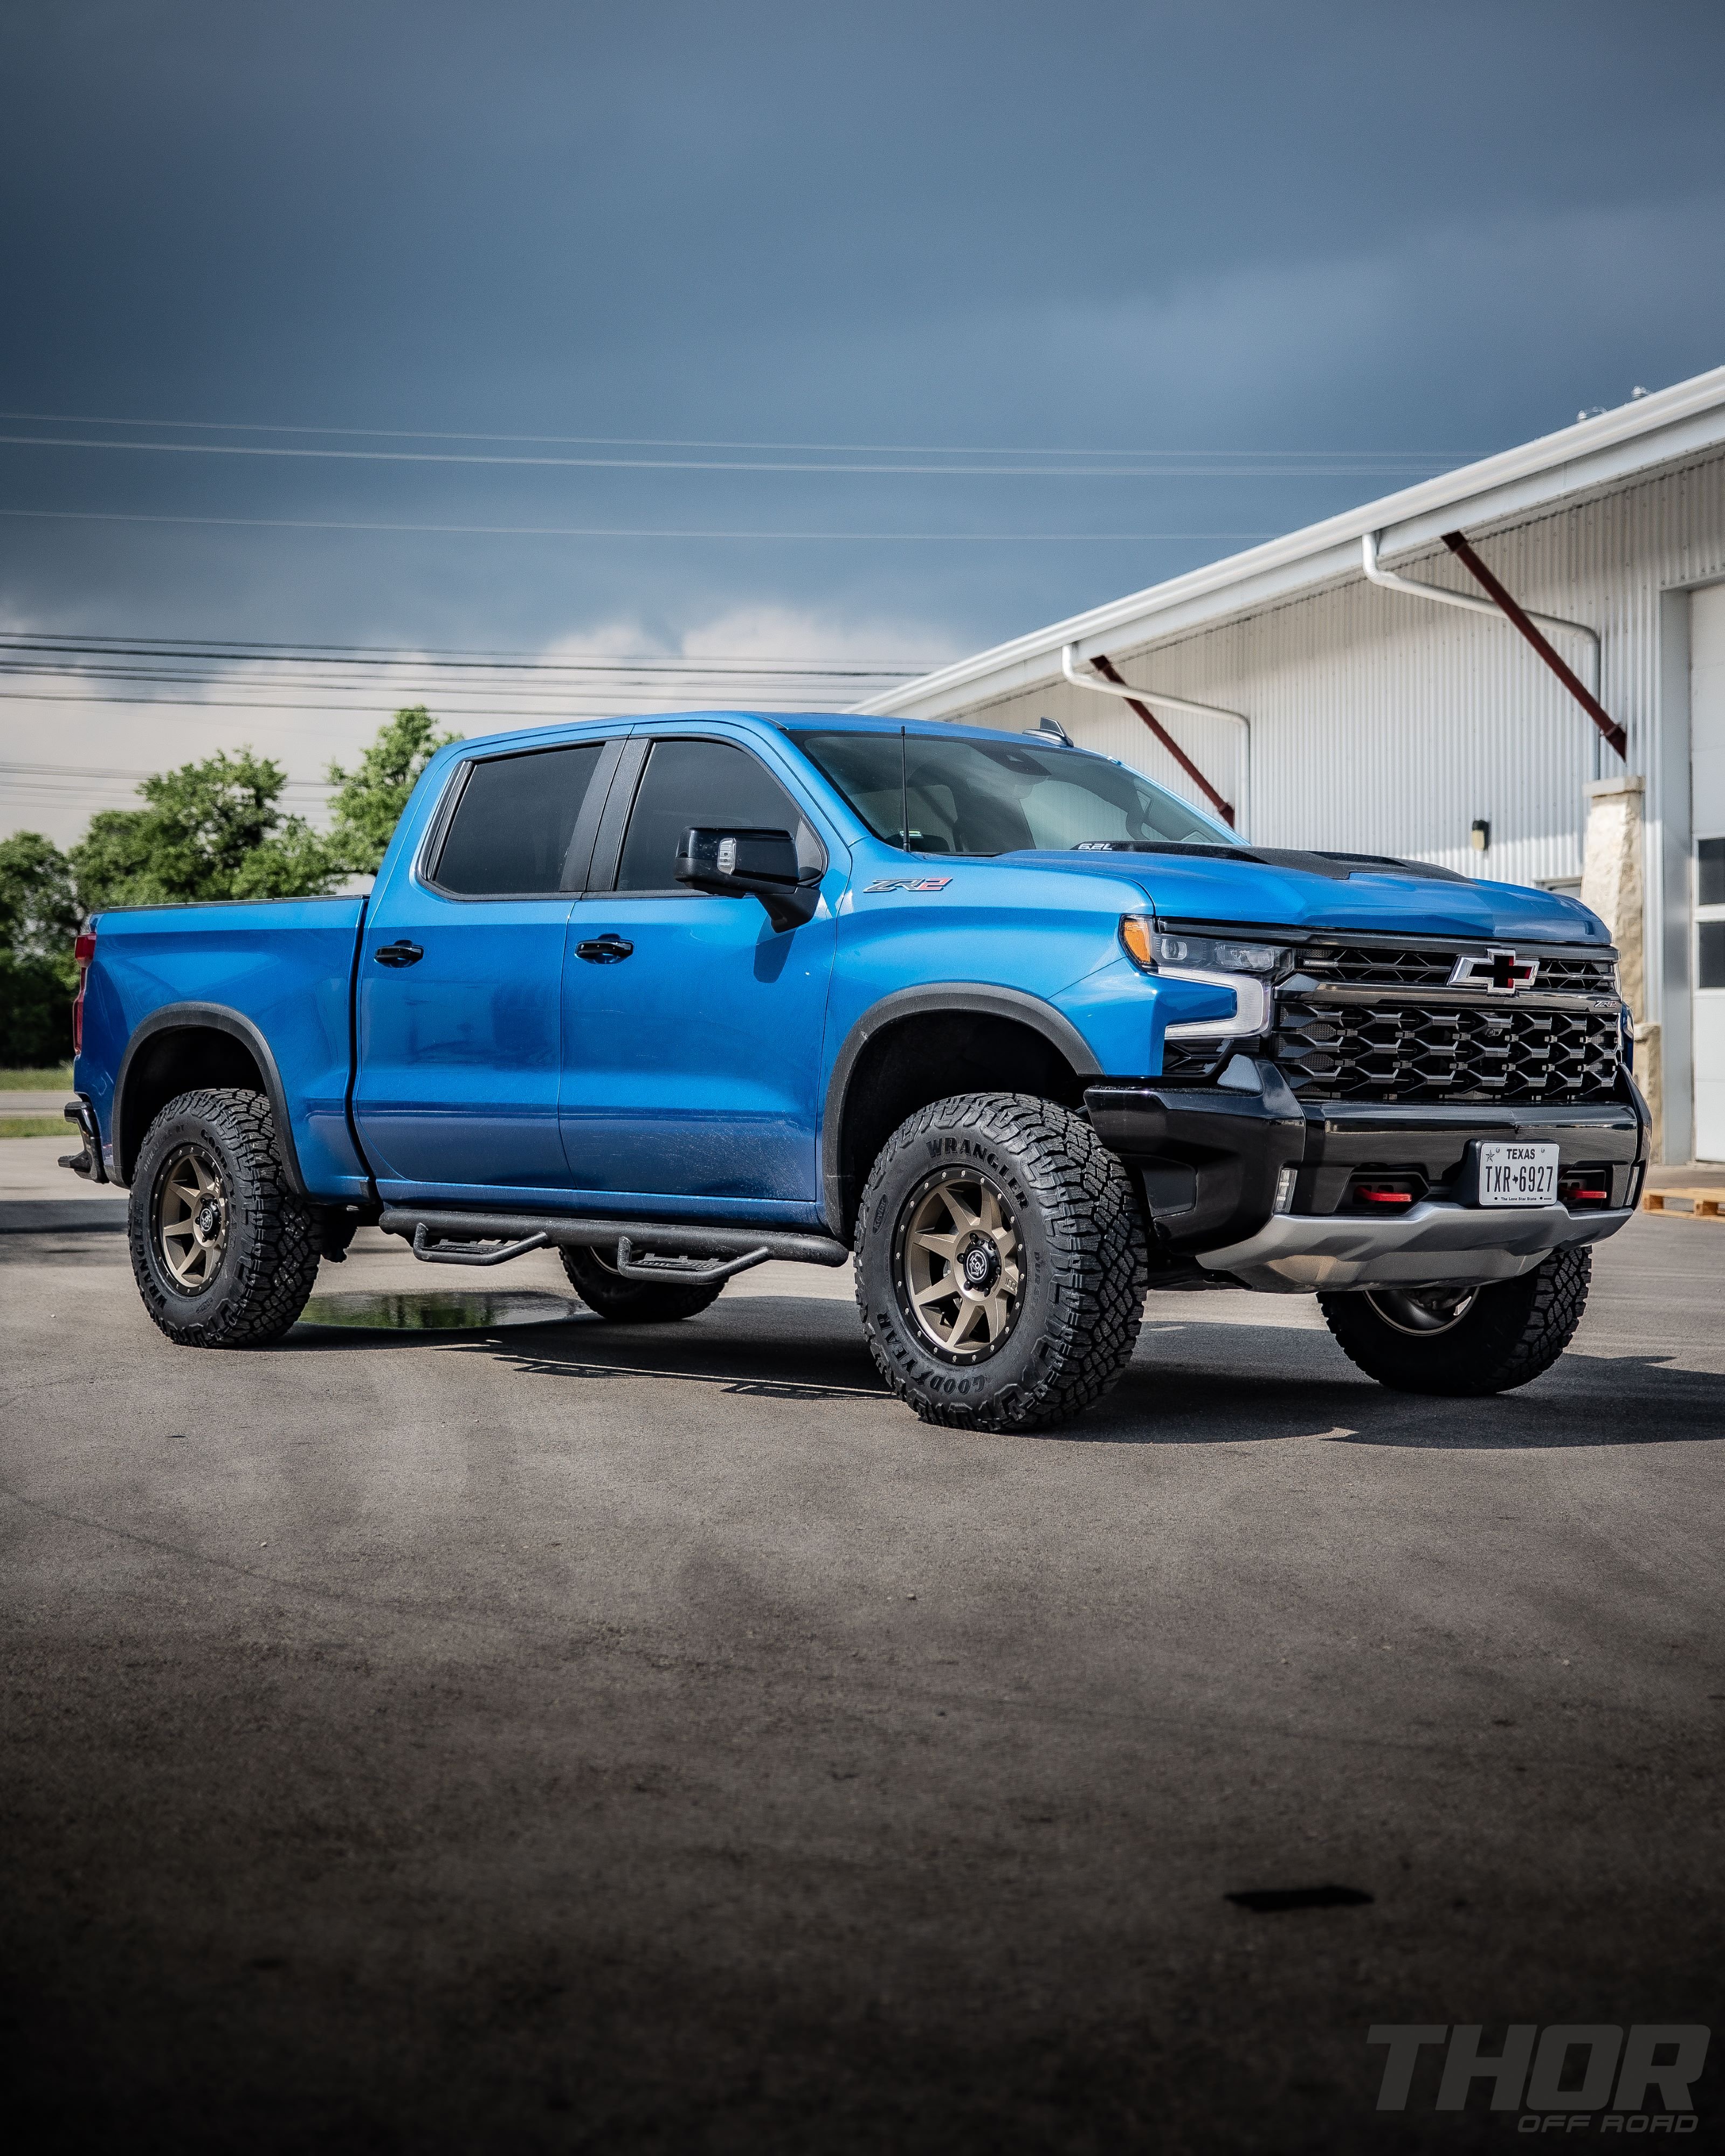 2024 Chevrolet Silverado 1500 ZR2 in Blue with Leveling Kit, Icon Rebound 18x9" Wheels, 295/70R18 Wrangler Duratrac RT Tires, Lomax Bed Cover